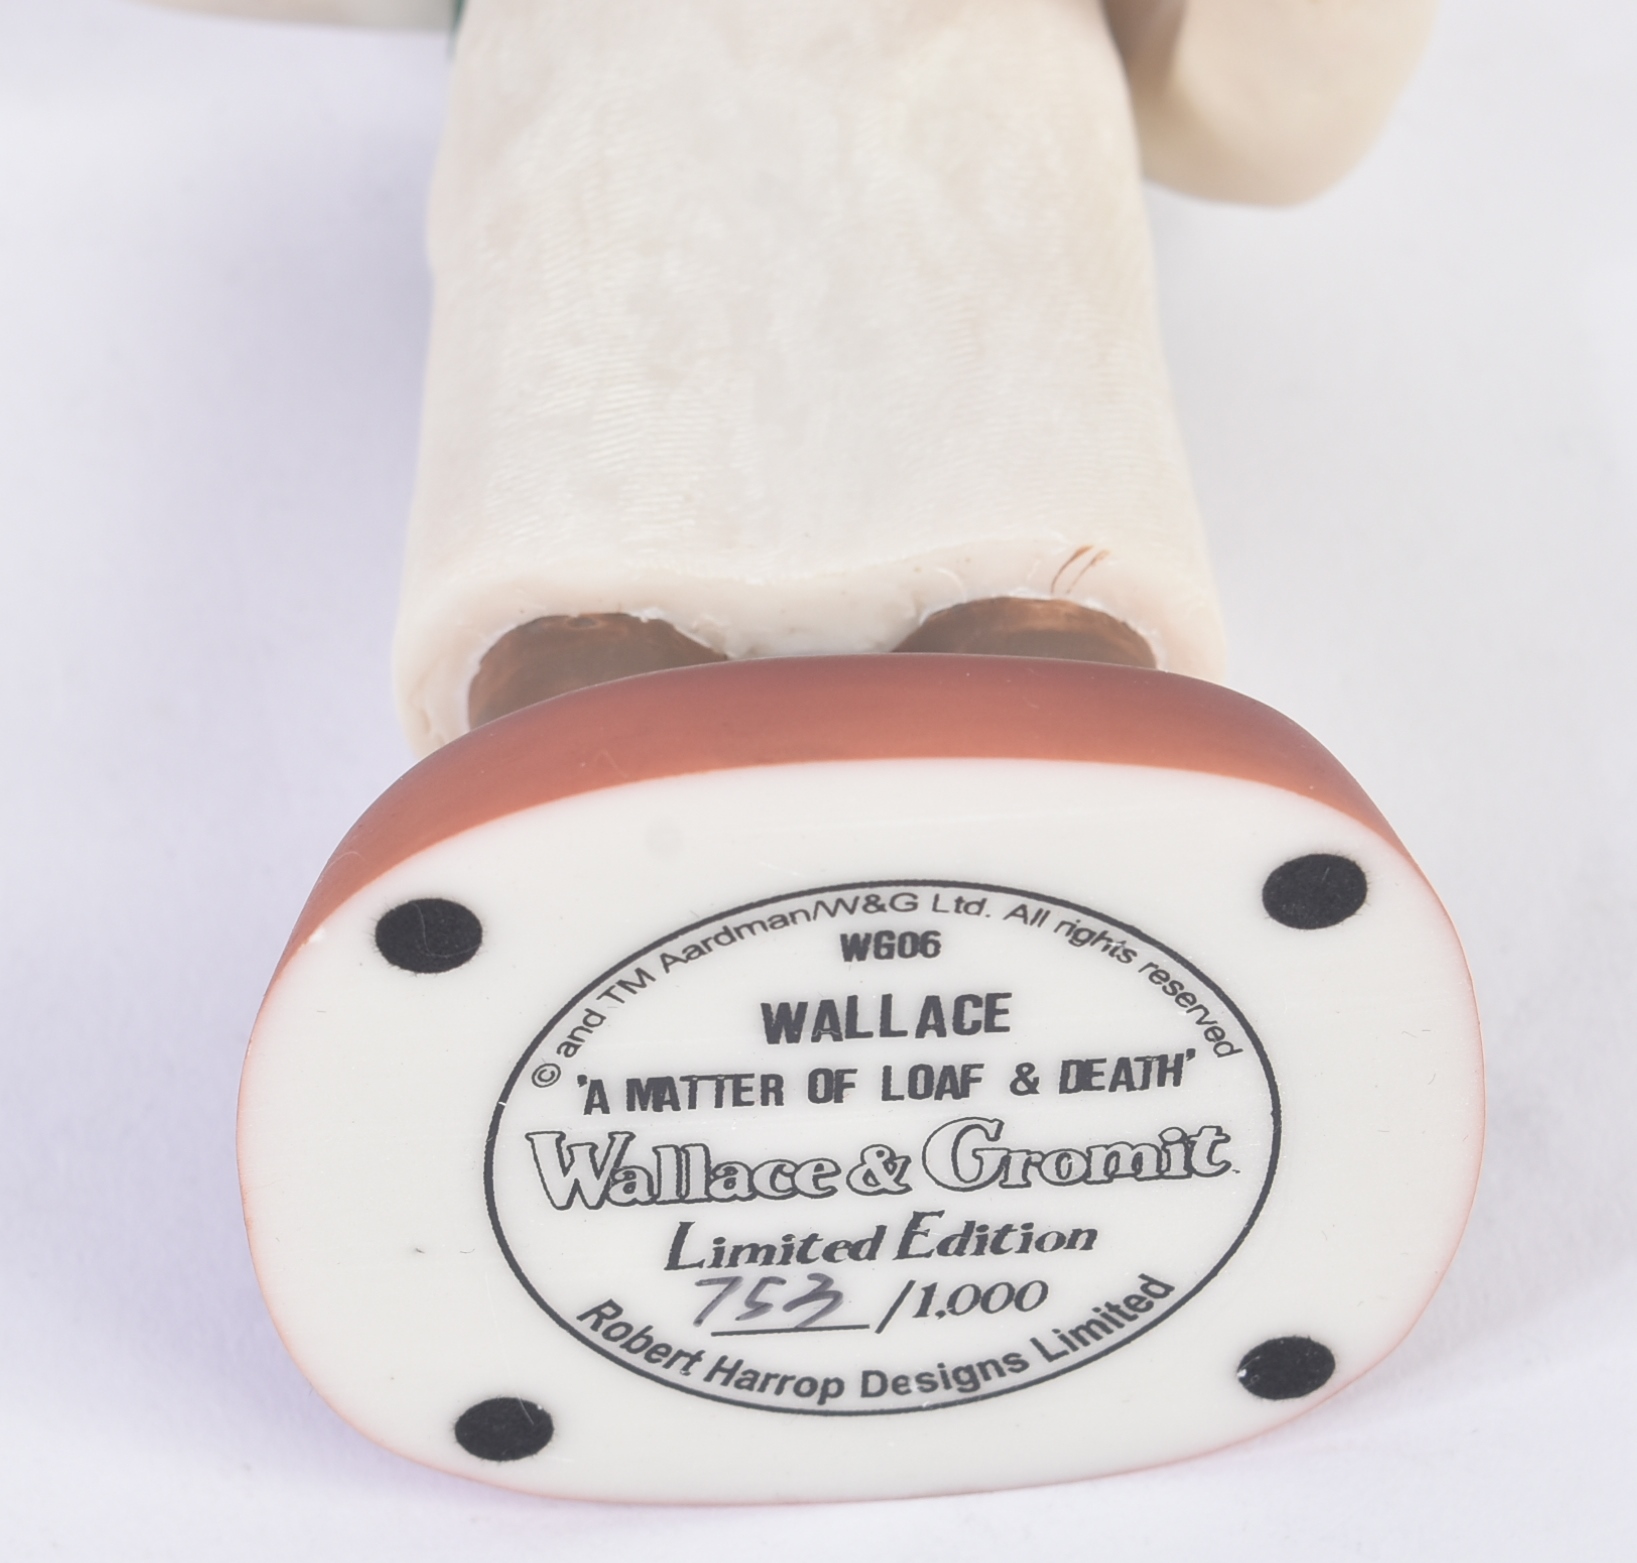 WALLACE & GROMIT - ROBERT HARROP - LIMITED EDITION FIGURINE - Image 4 of 4